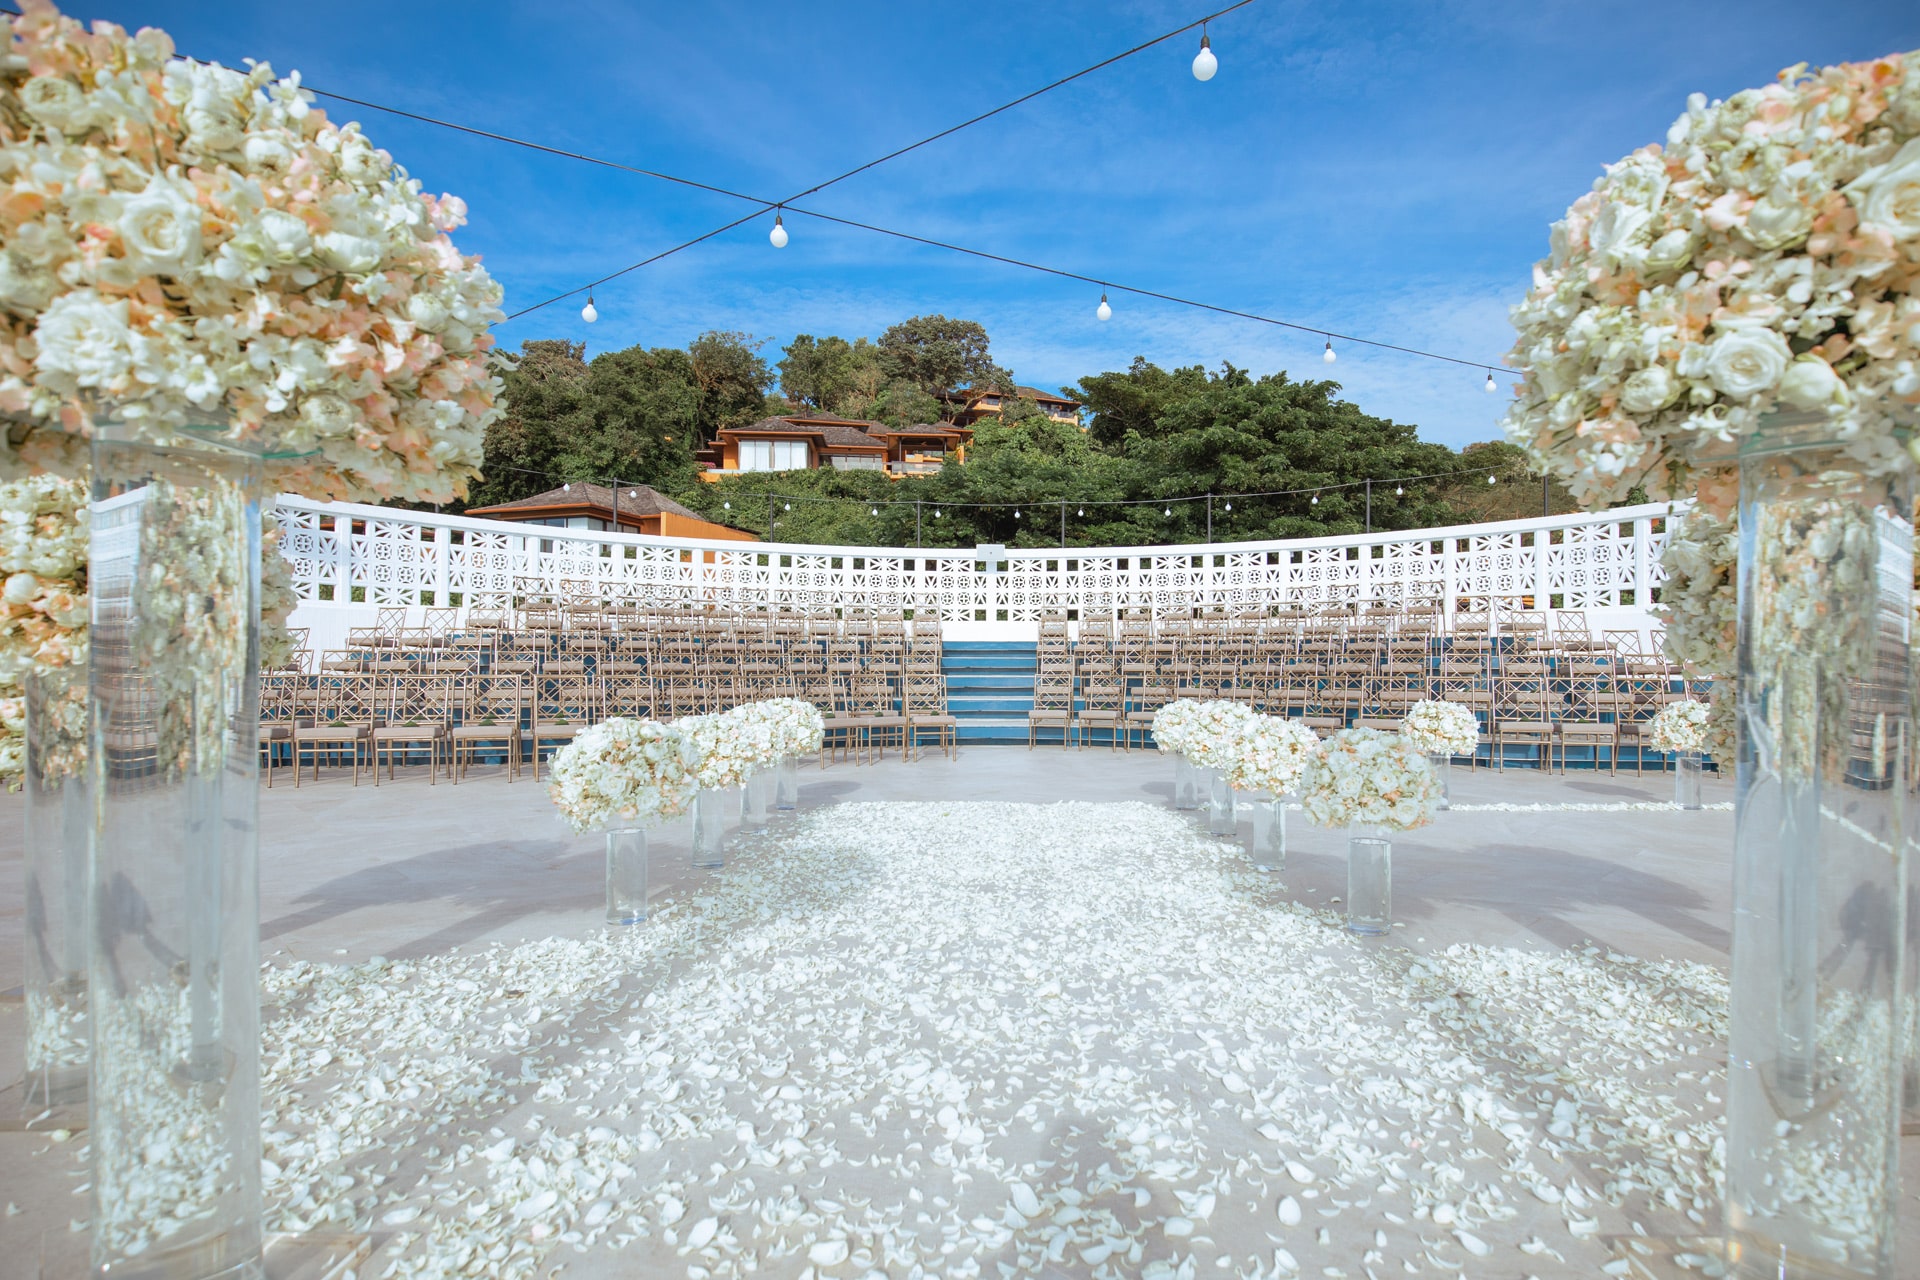 theater style seating rooftop wedding venue